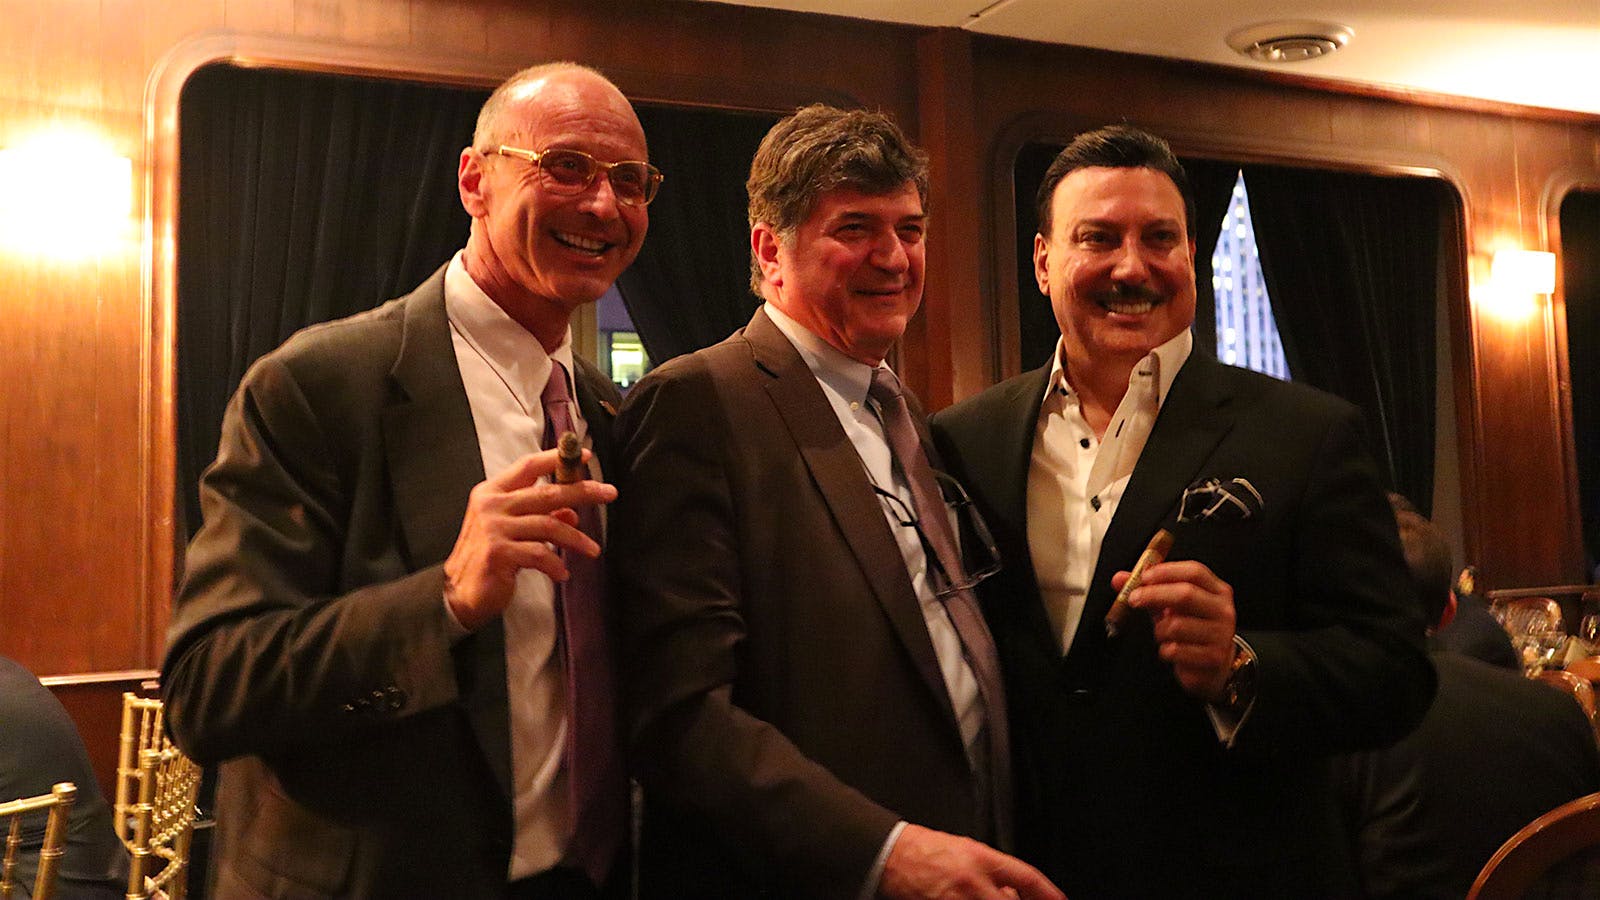 Dr. Jude Barbera, Fuente fan and cigar enthusiast Dr. Gary Giangola and Carlos “Carlito” Fuente Jr.